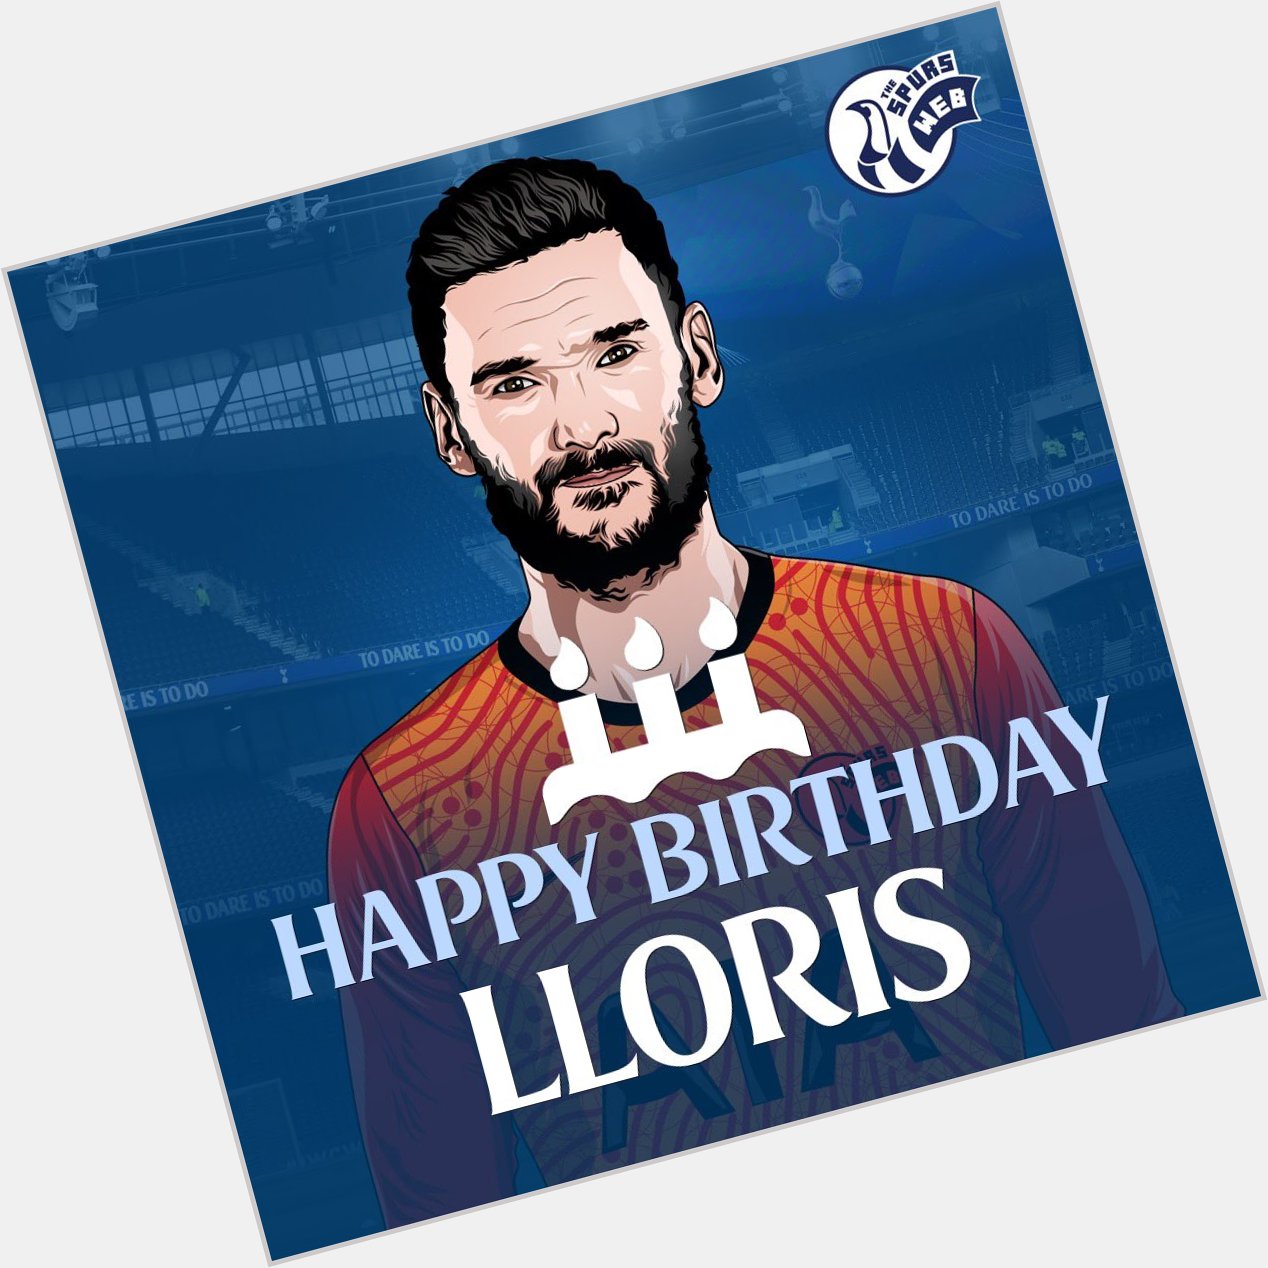 Happy birthday to our skipper Hugo Lloris who turns 34 today  